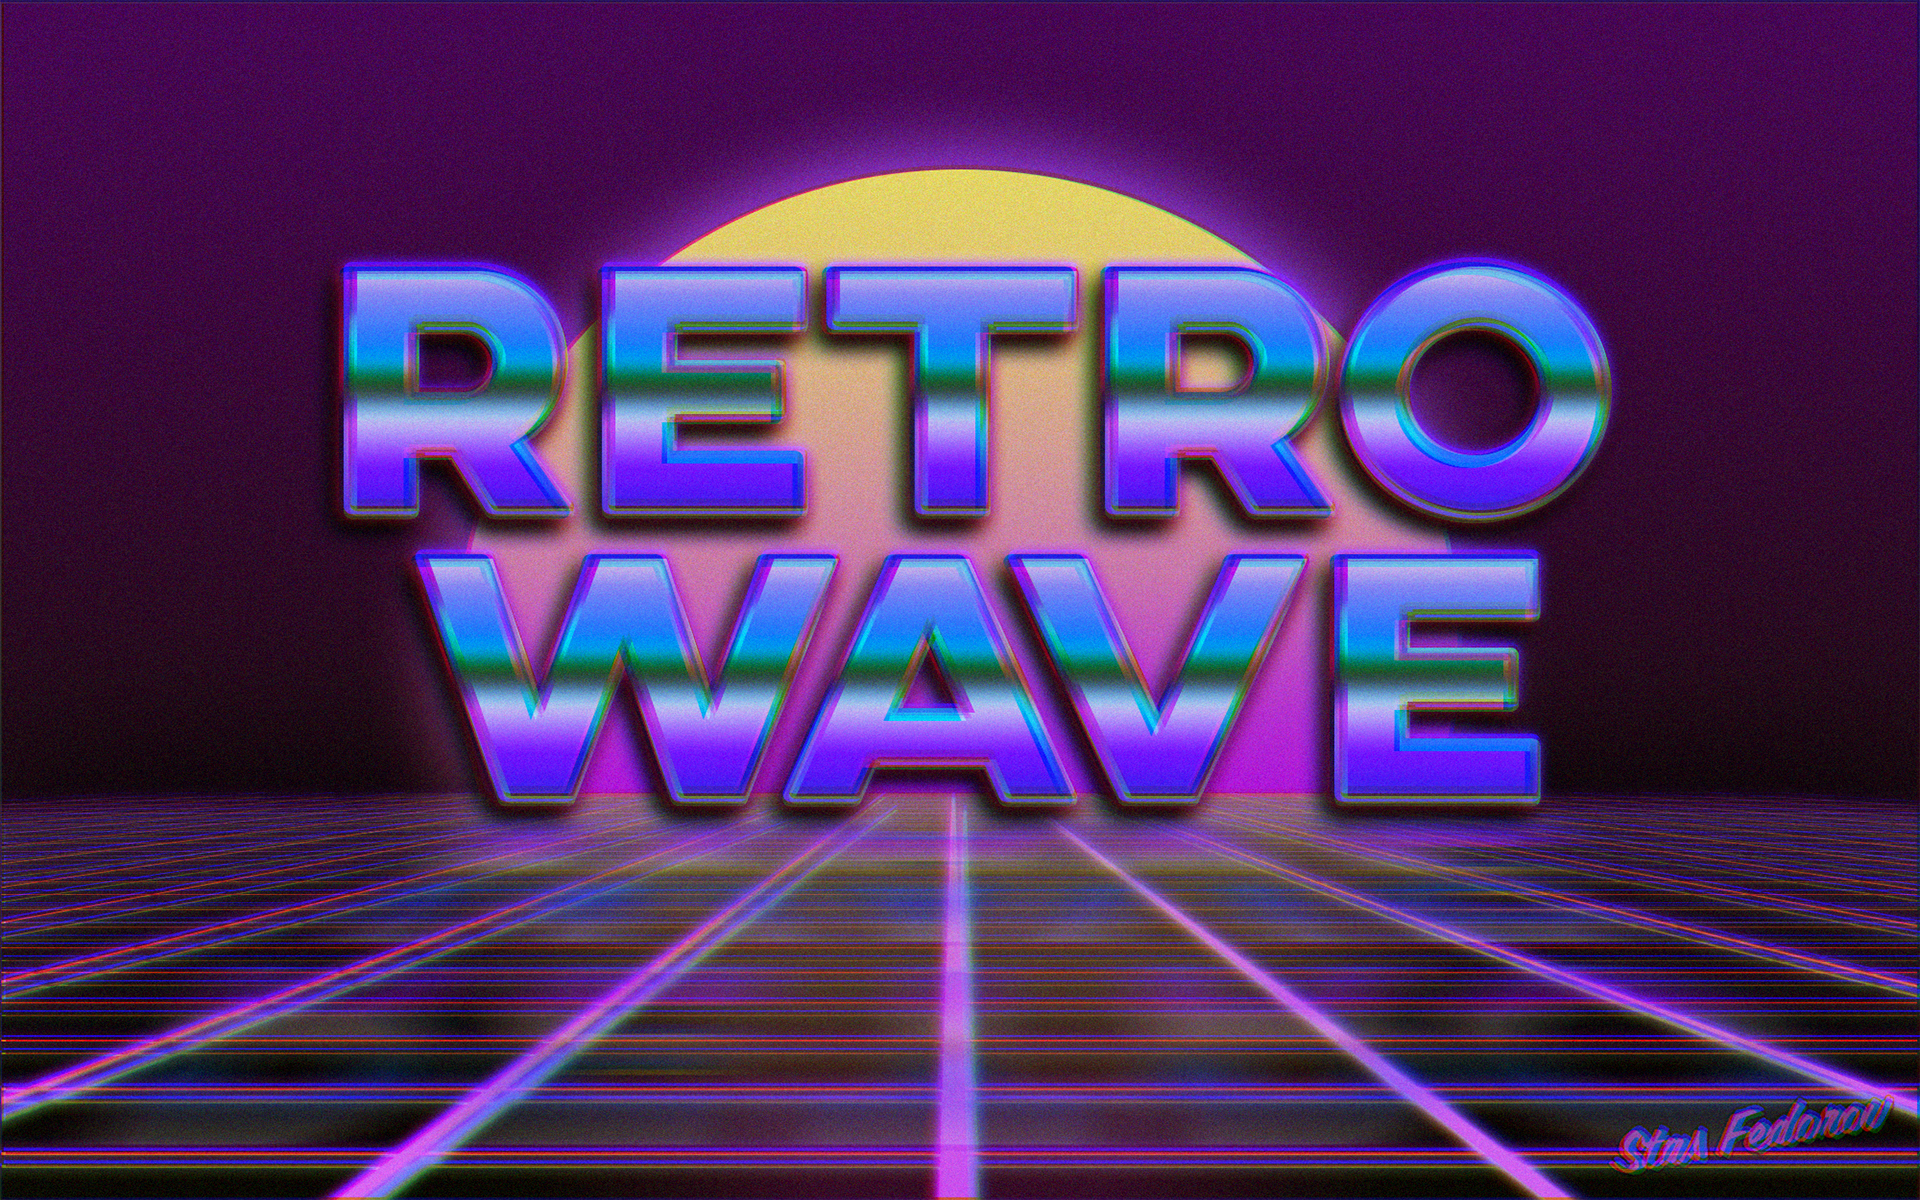 New Retro Wave, Synthwave, 1980s, Typography, Neon, Photoshop Wallpaper